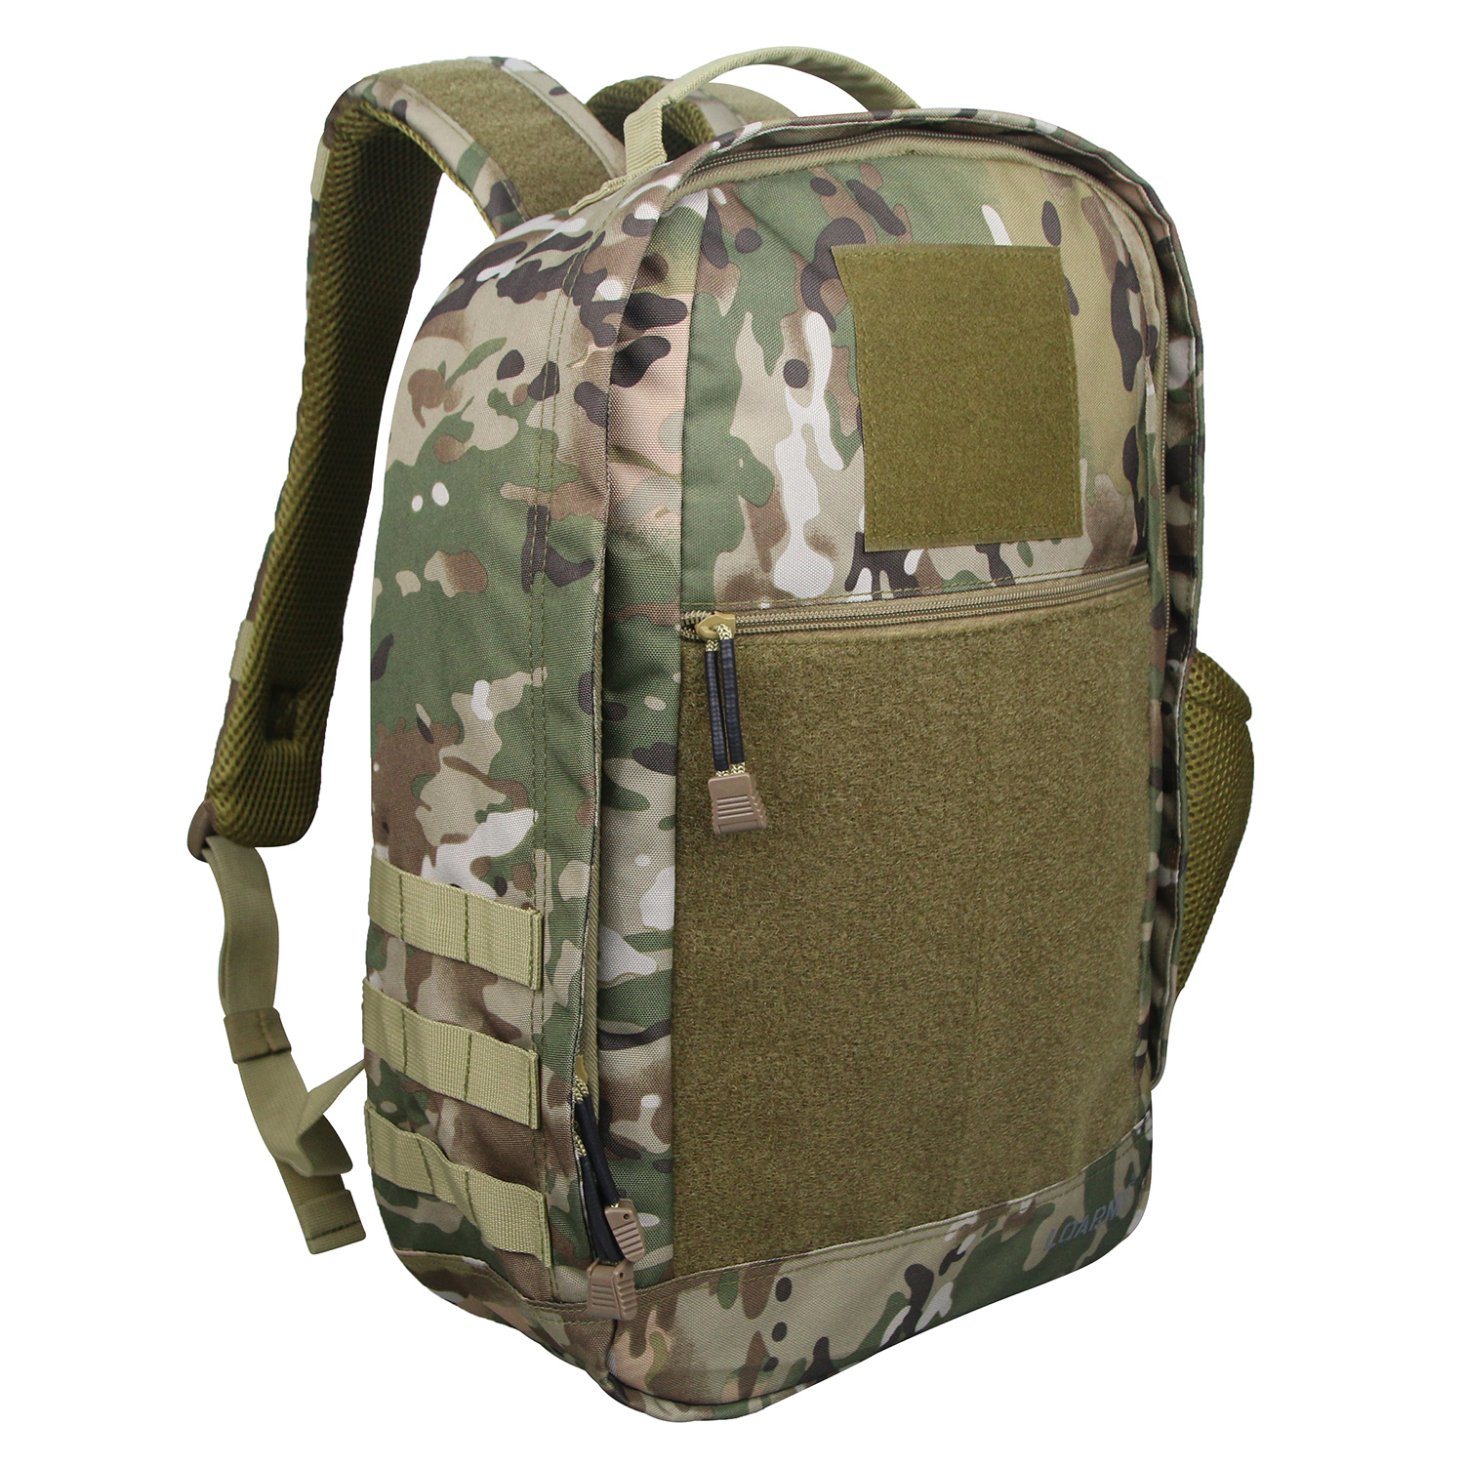 Durable Military Backpack 3D Camouflage Troops Backpack Laptop Backpack